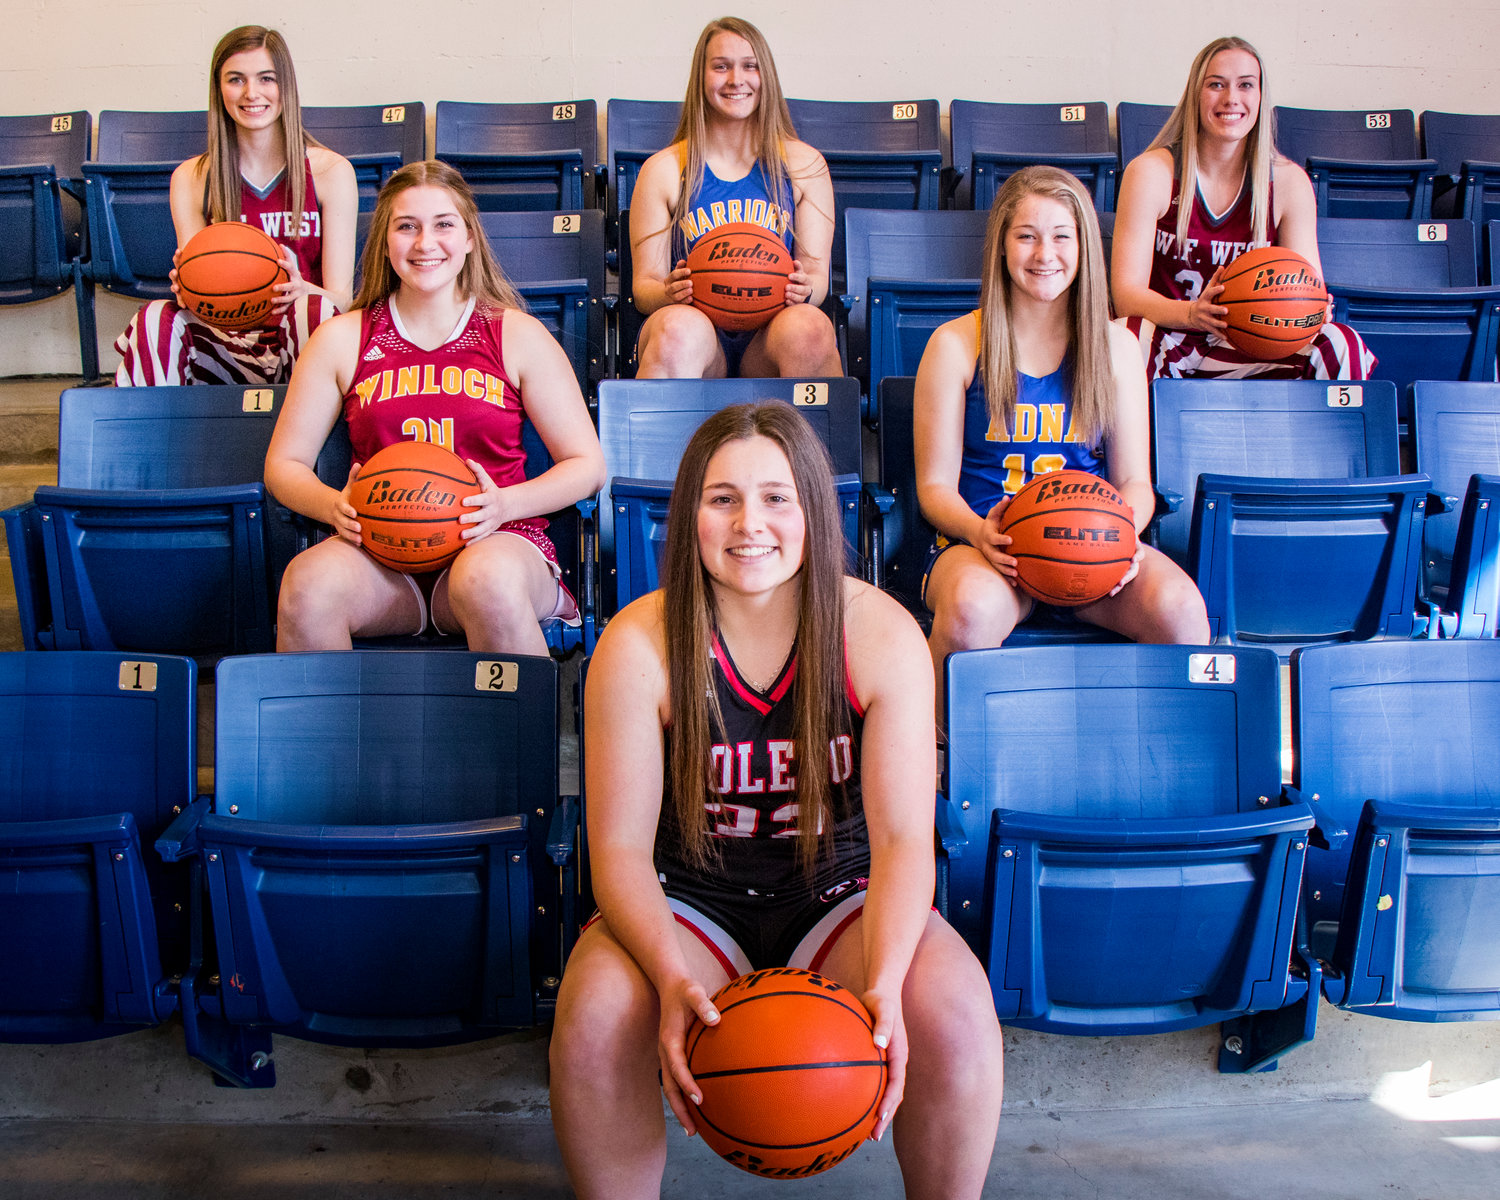 The All-Area Girls Basketball Team poses for a photo Monday afternoon at Centralia College. Front, Toledo's Kal Schaplow. Middle row, from left, Winlock's Addison Hall and Adna's Payton Aselton. Back row, from left, W.F. West's Drea Brumfield, Rochester's Paige Winter and W.F. West's Annika Waring. (Jared Wenzelburger / jwenzelburger@chronline.com)